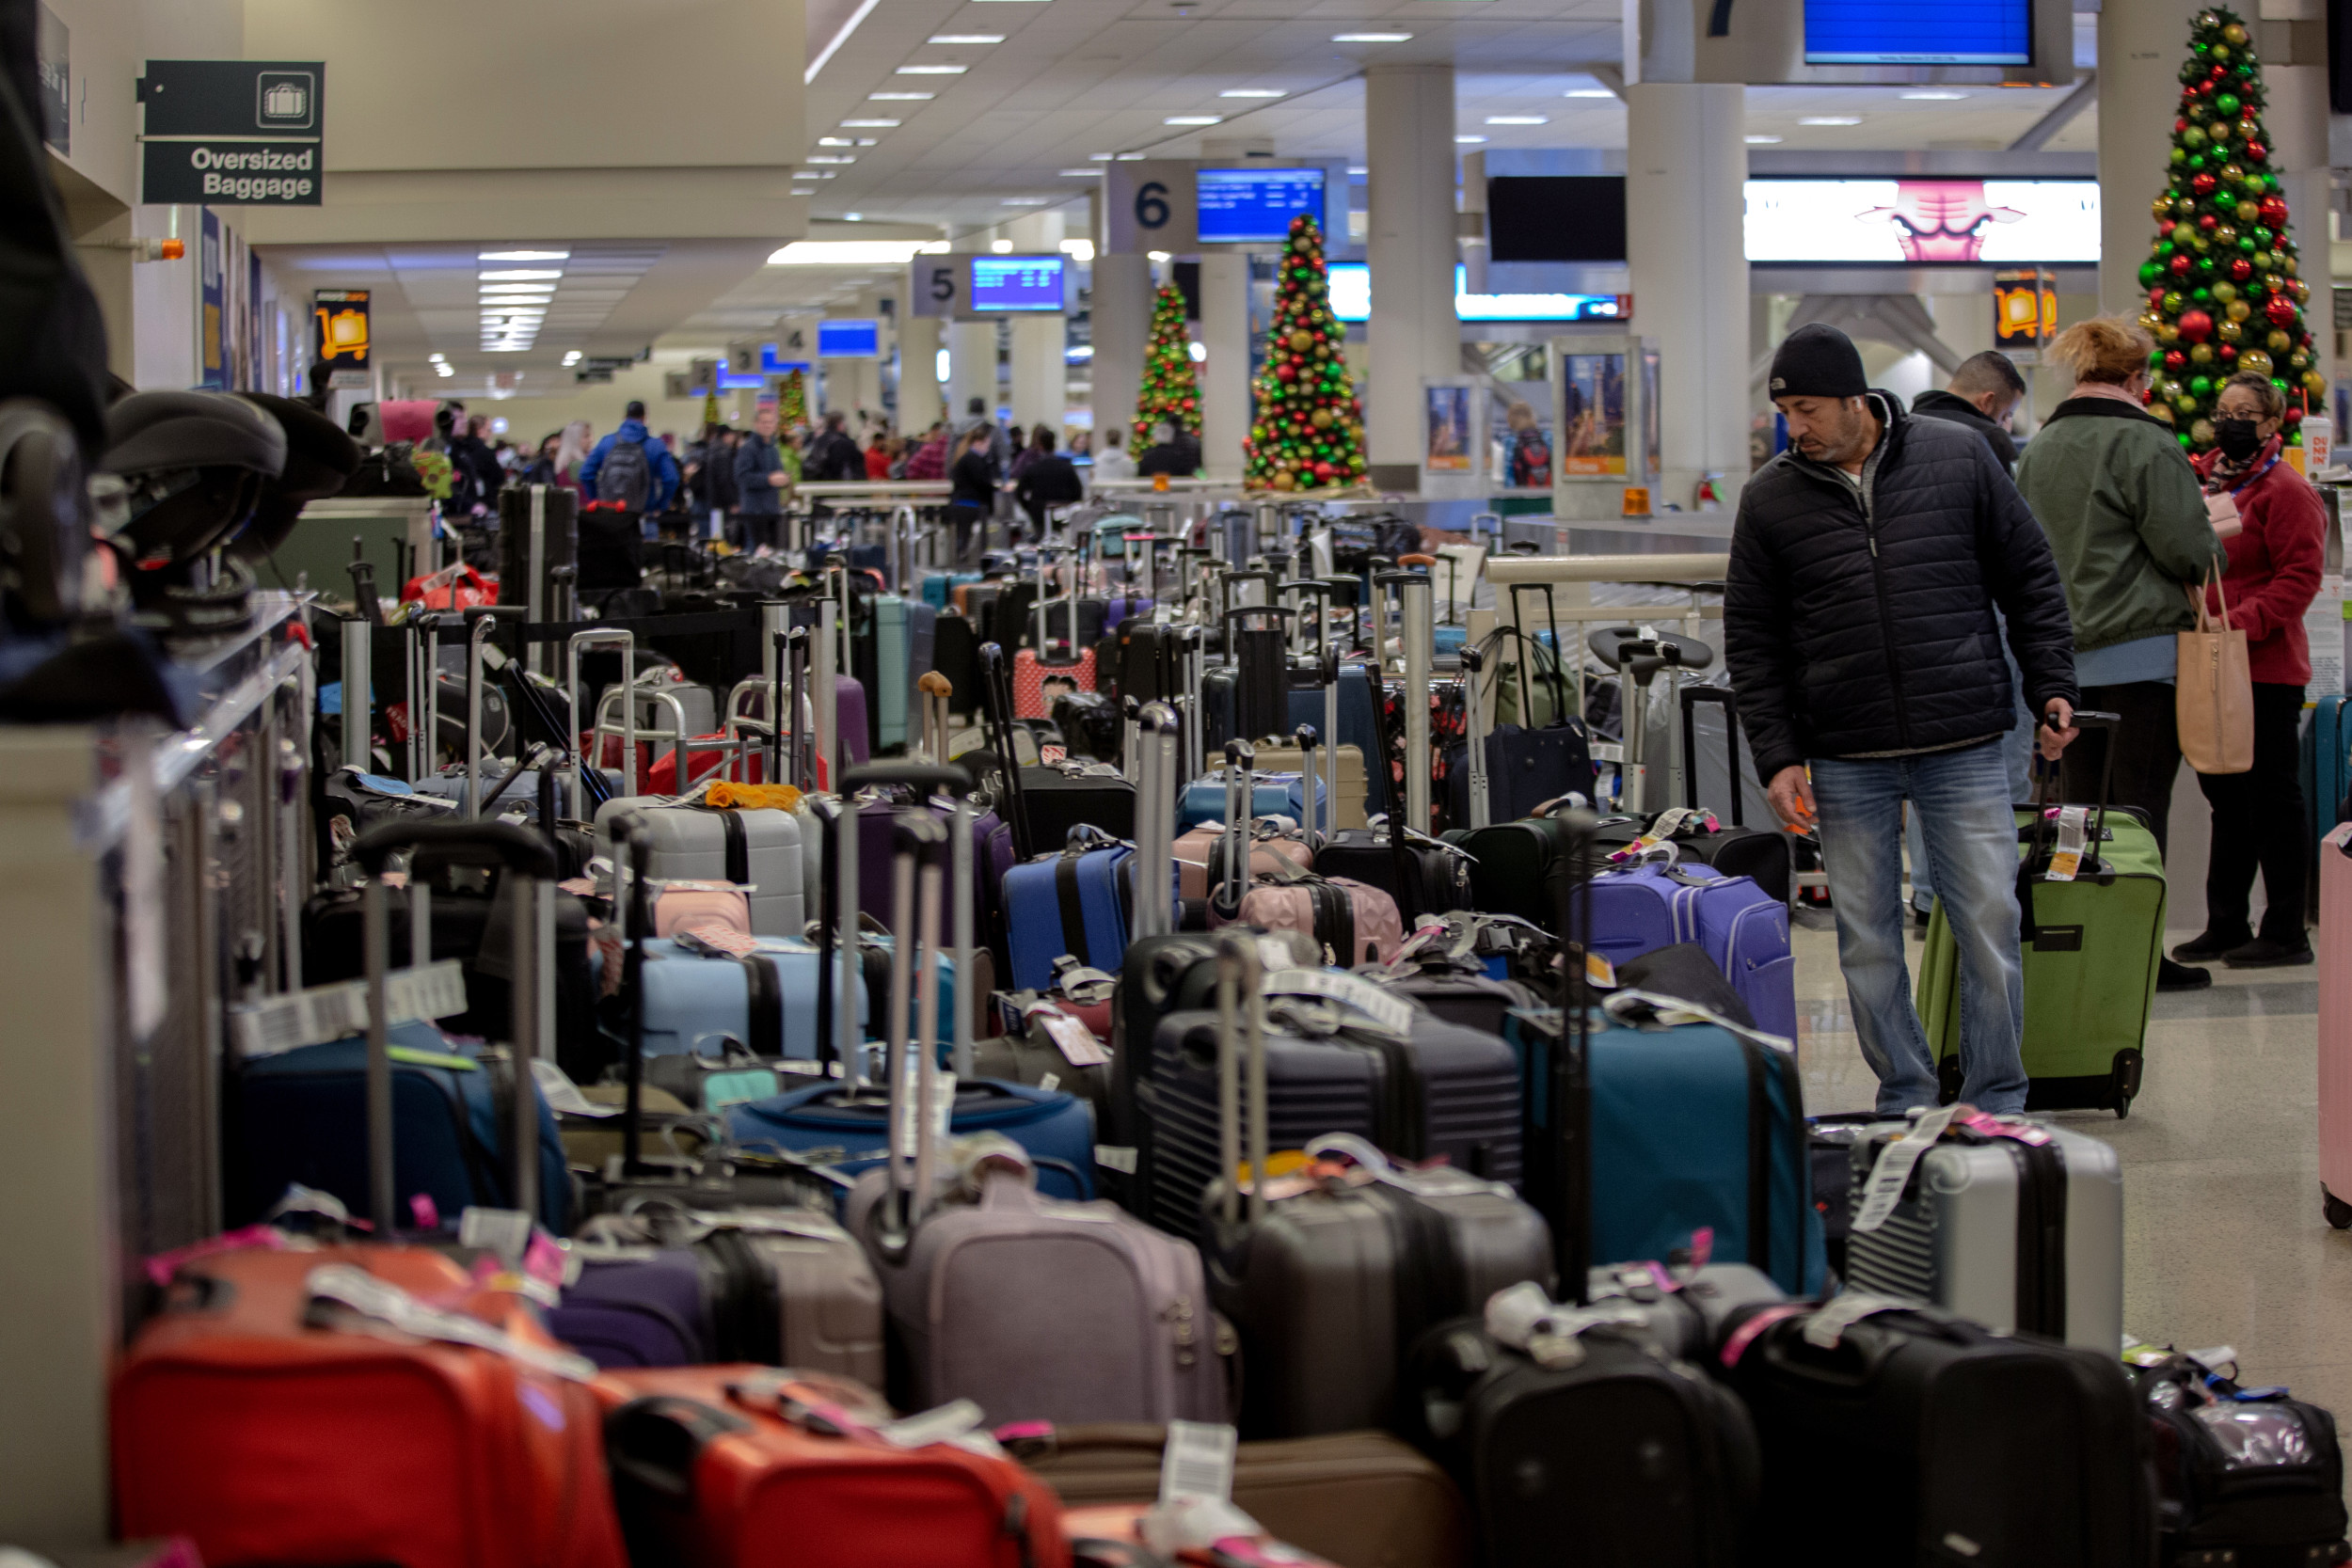 Southwest Airlines Videos Show Thousands of Lost Luggage: 'Sea of Bags